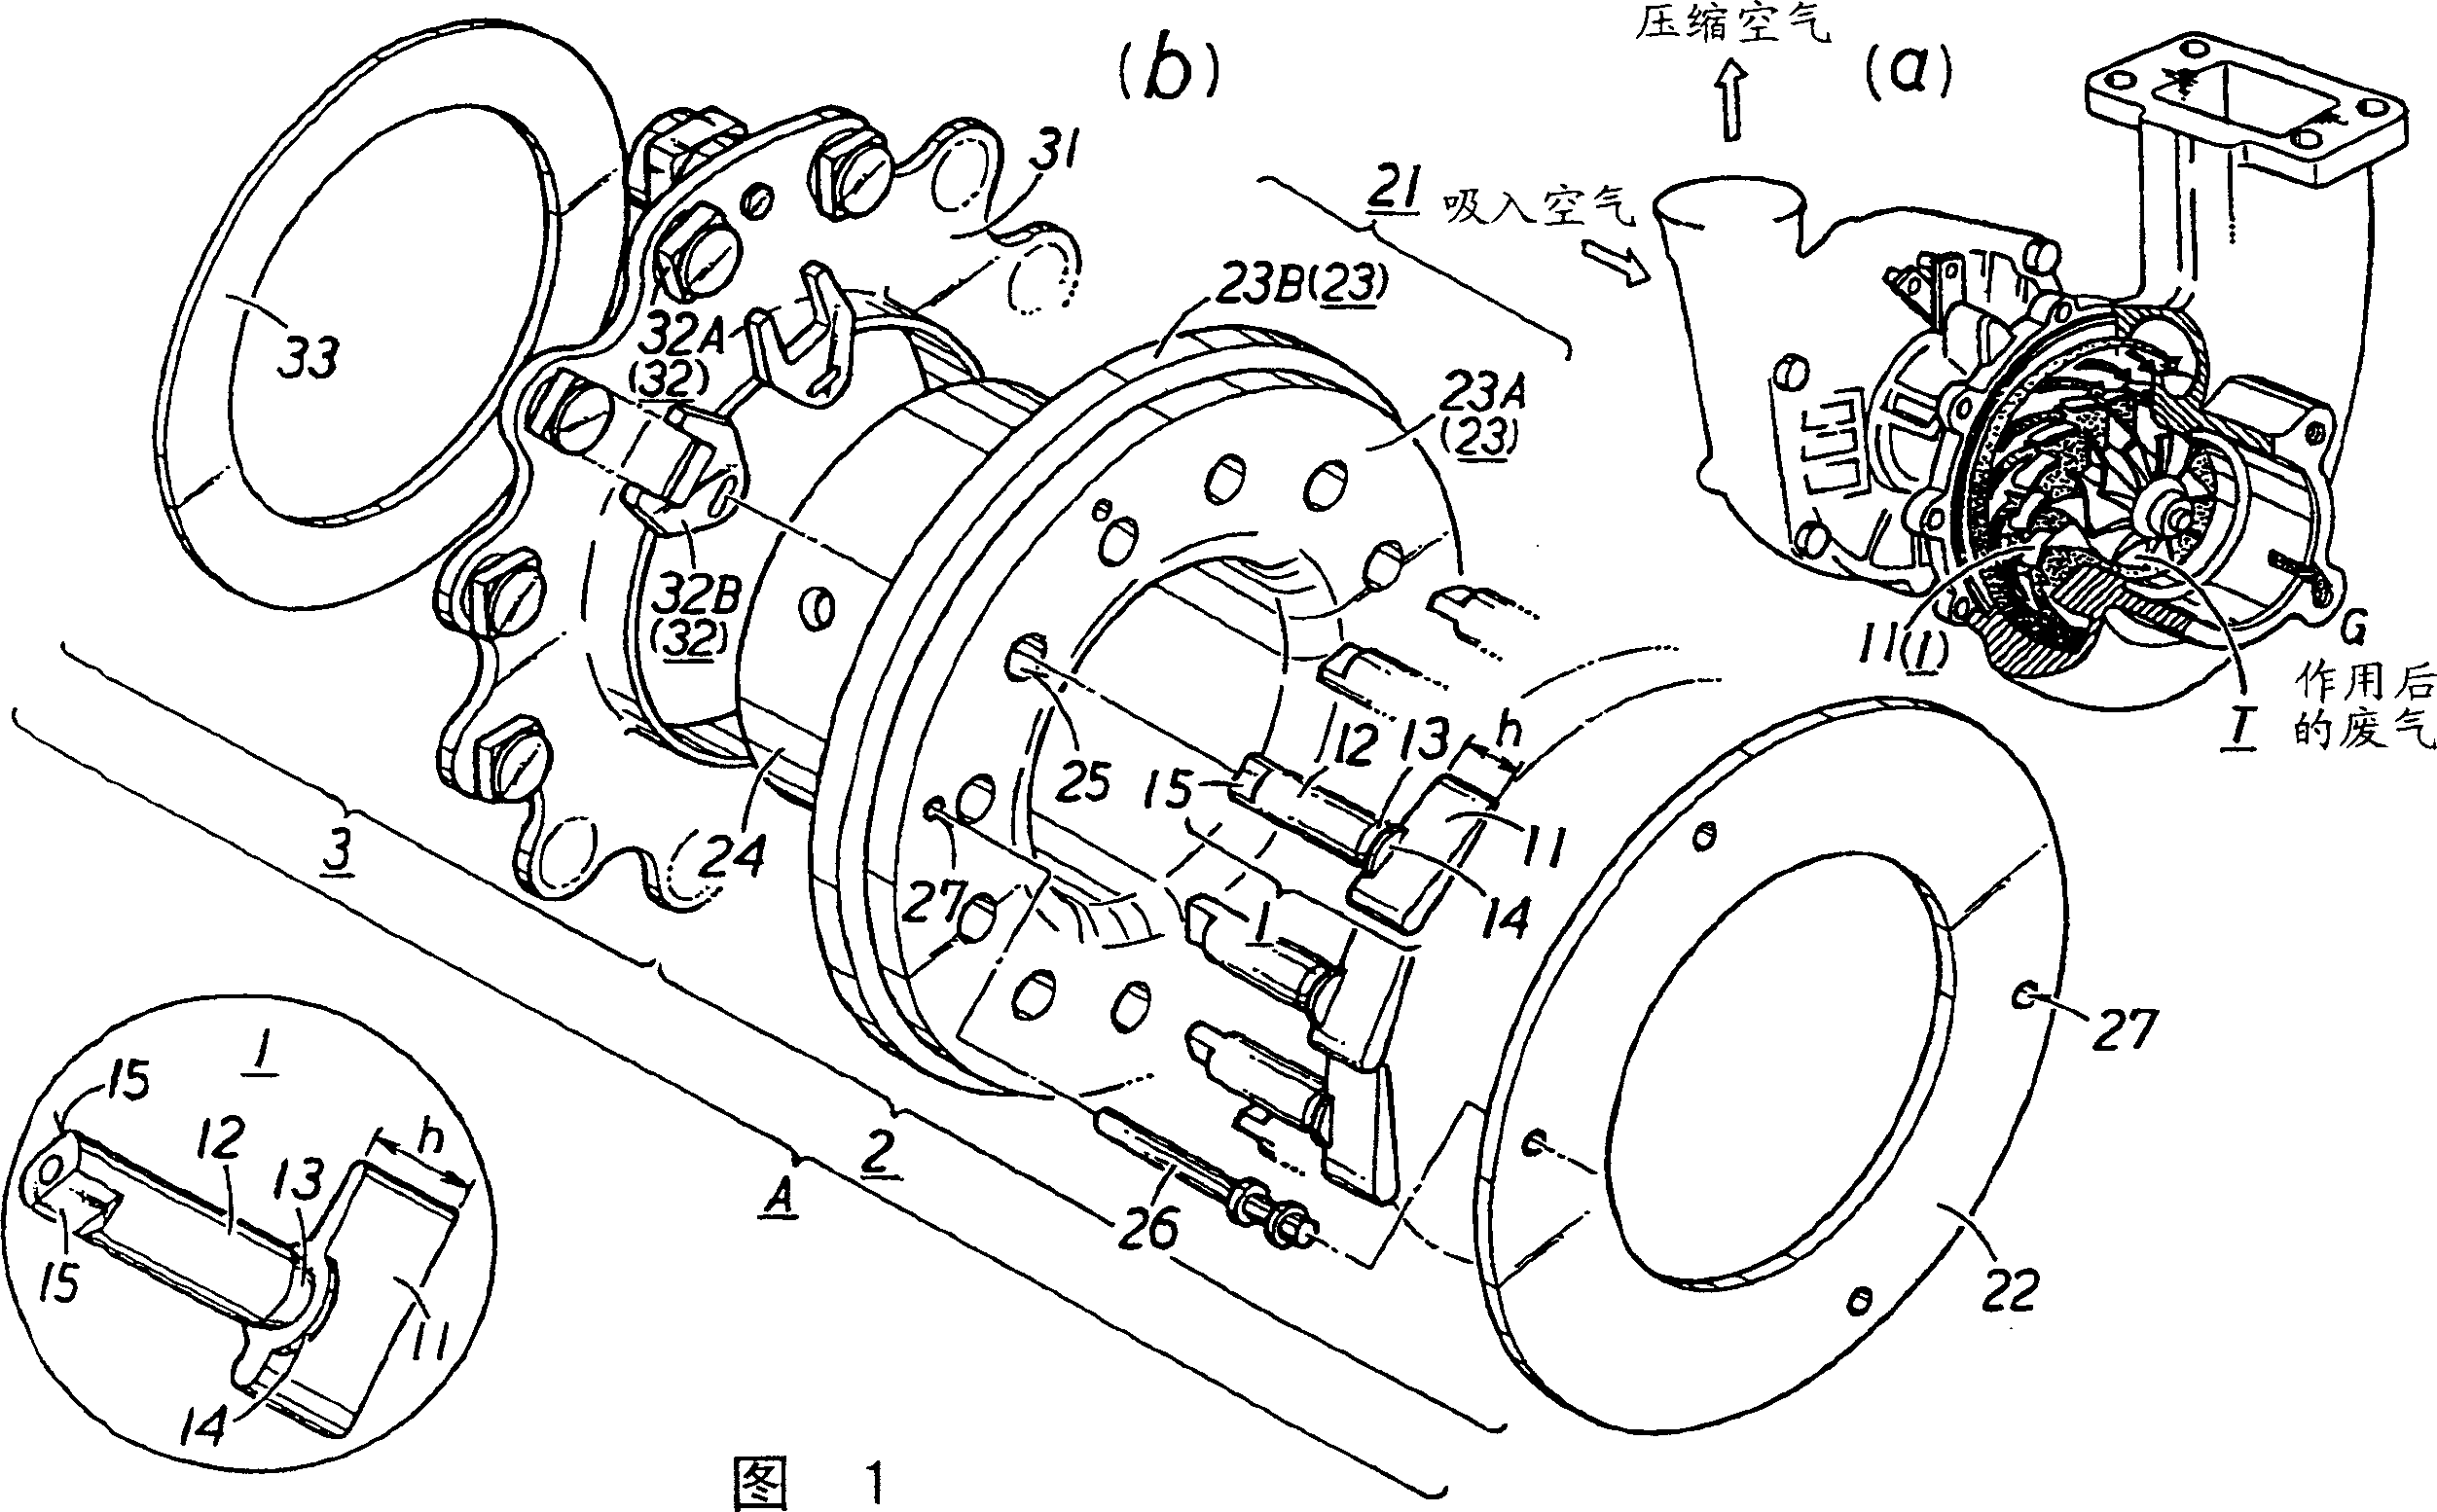 Surface-reformed exhaust gas guide assembly of VGS type turbo charger, and method of surface-reforming component member thereof